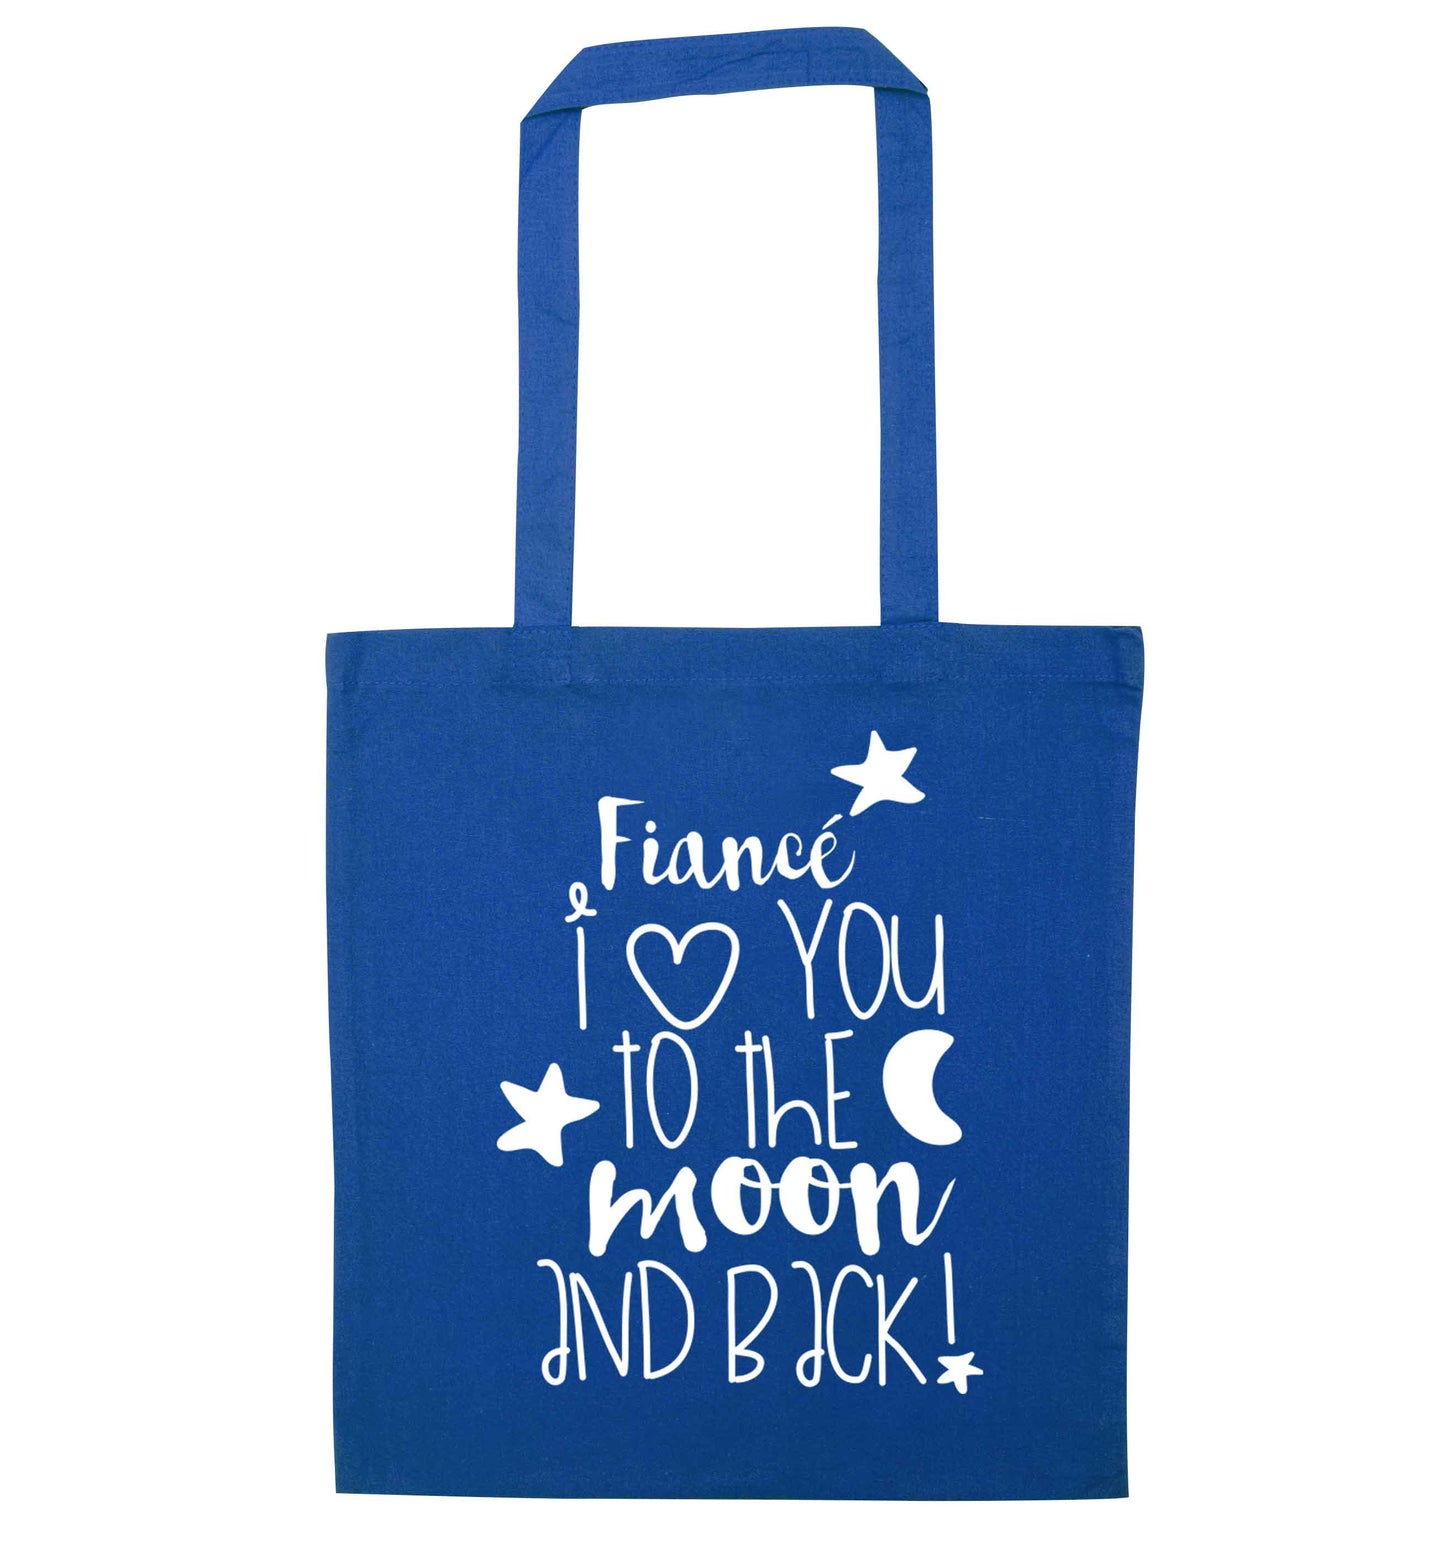 Fiancé I love you to the moon and back blue tote bag